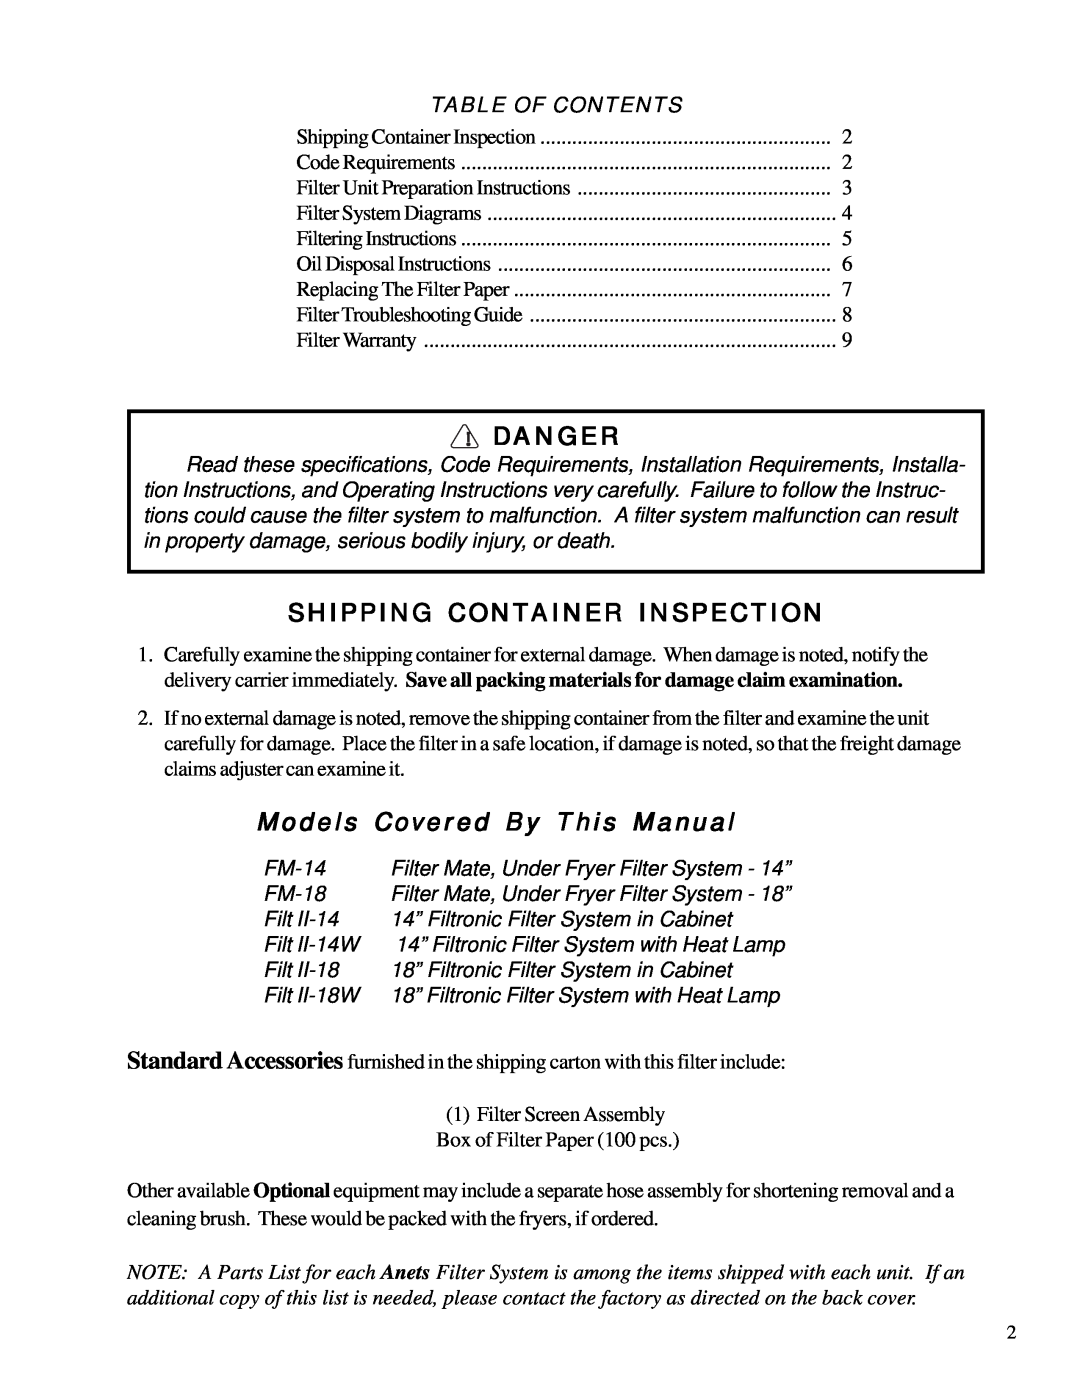 Anetsberger Brothers FM-14 warranty Danger, Shipping Container Inspection, Models Covered By This Manual, Table Of Contents 